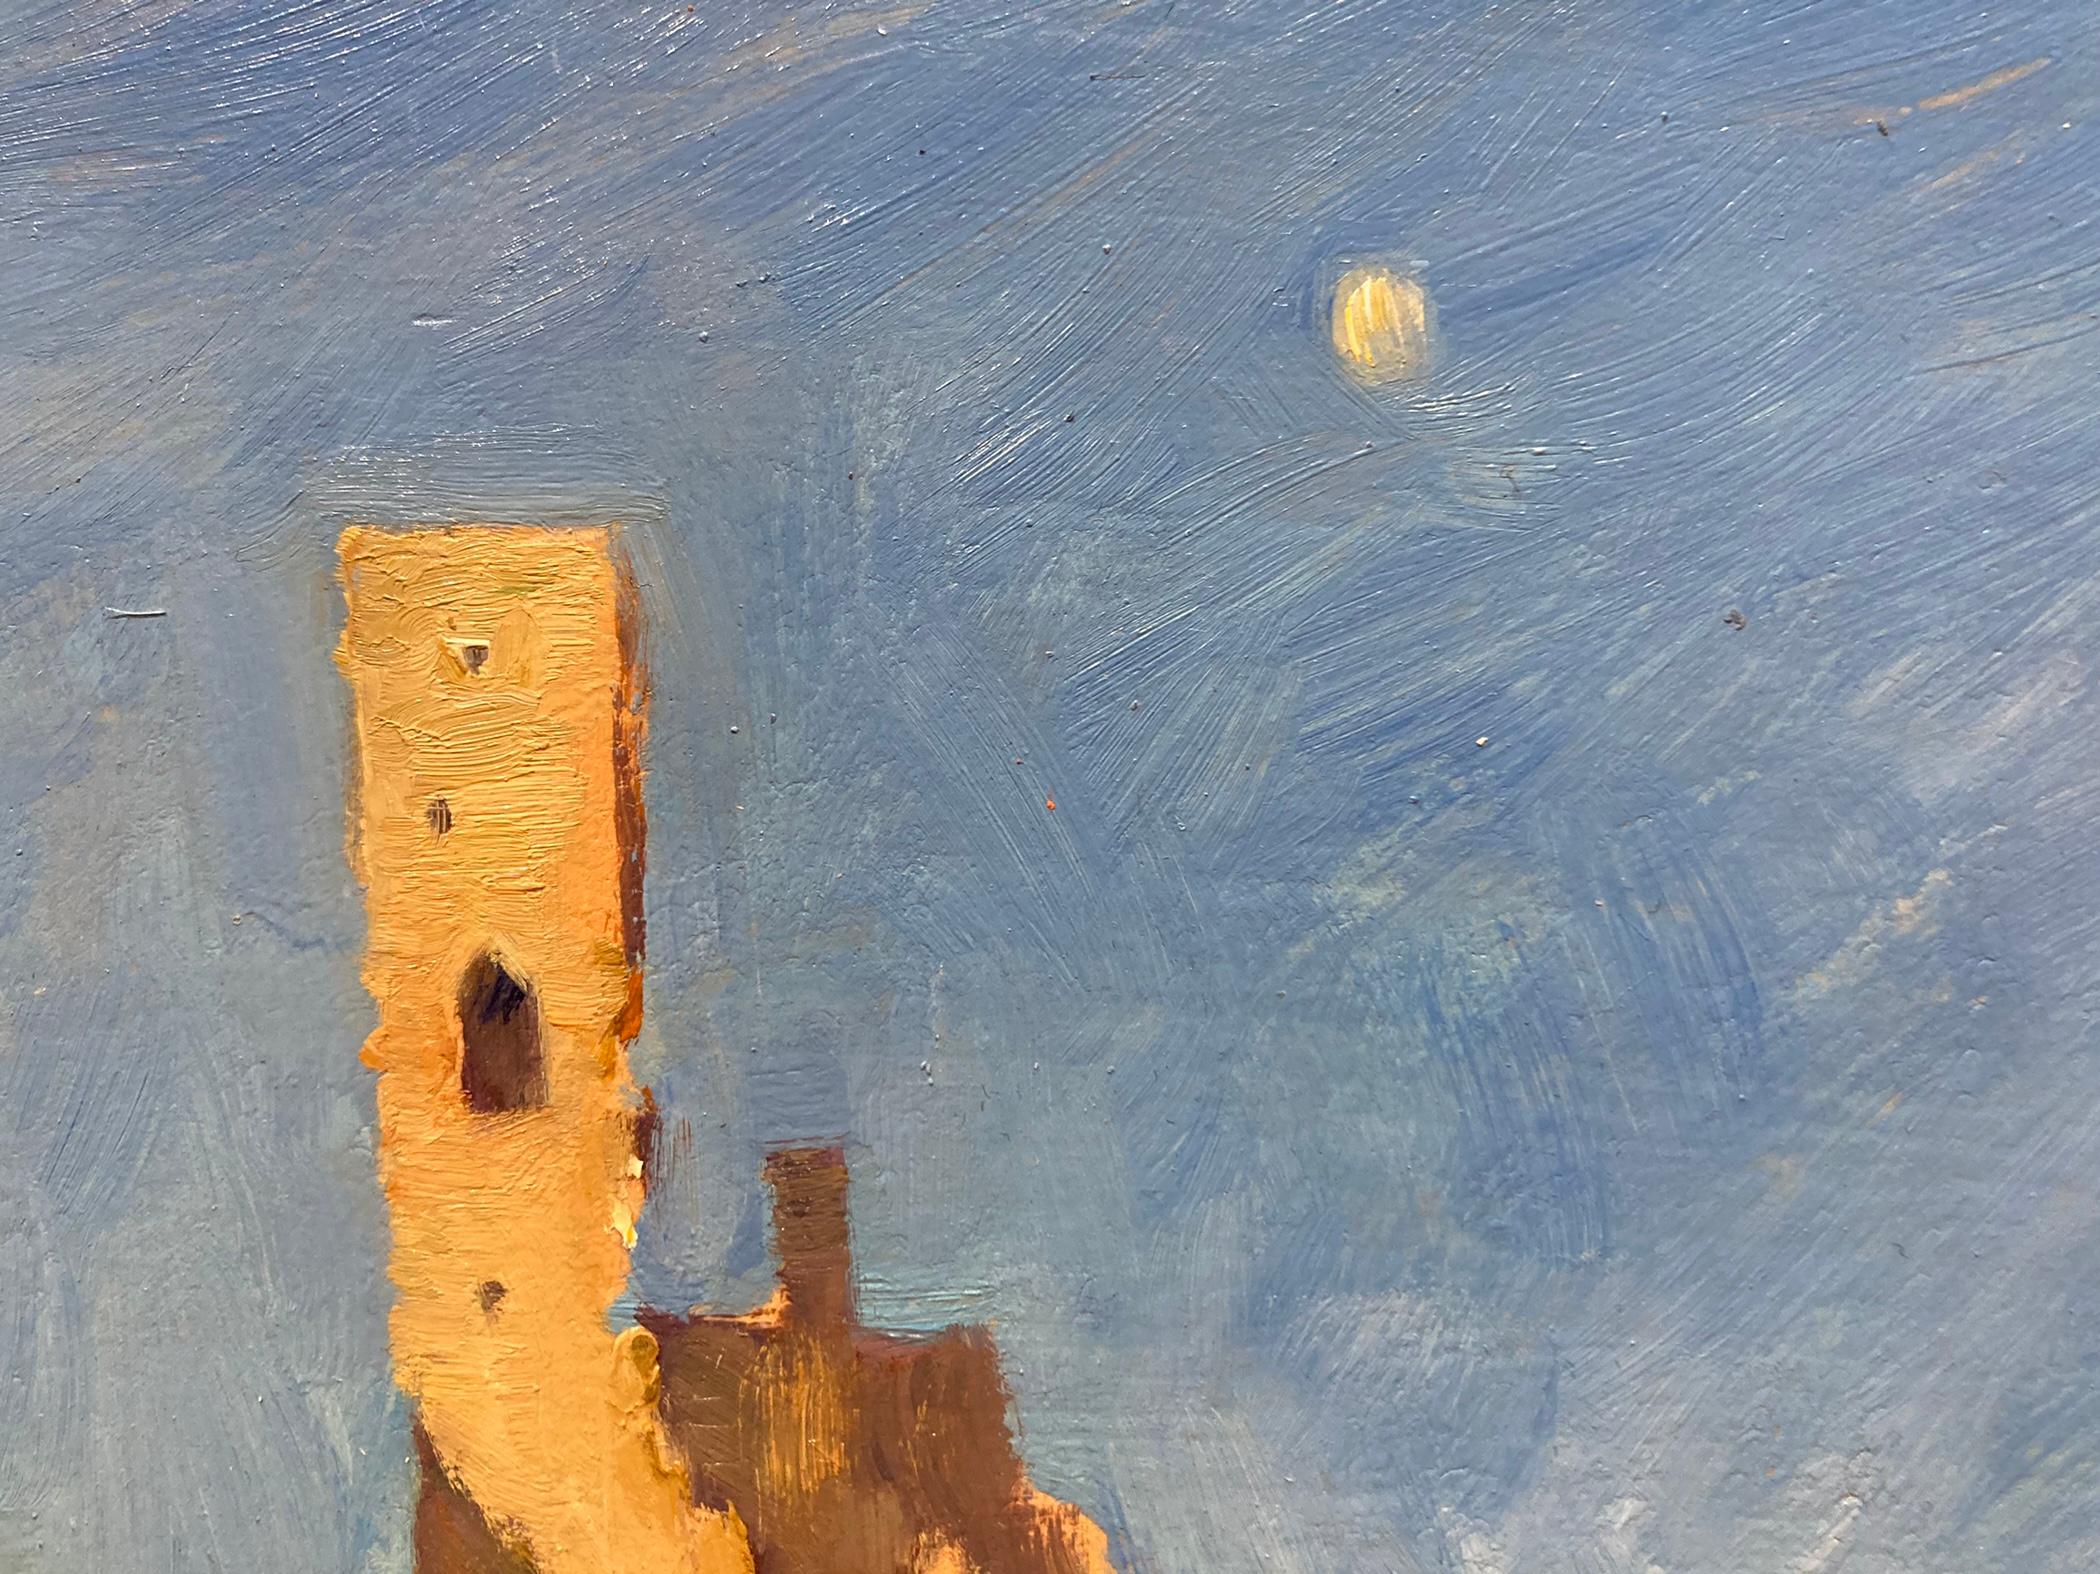 Orsolic Dalessio paints a romantic scene of a couple in the distance taking in the view of ruins atop steep cliffs. The setting sun reflects a golden hue on the tombs and cliff side while the moon rises in the background. Orsolic Dalessio captures